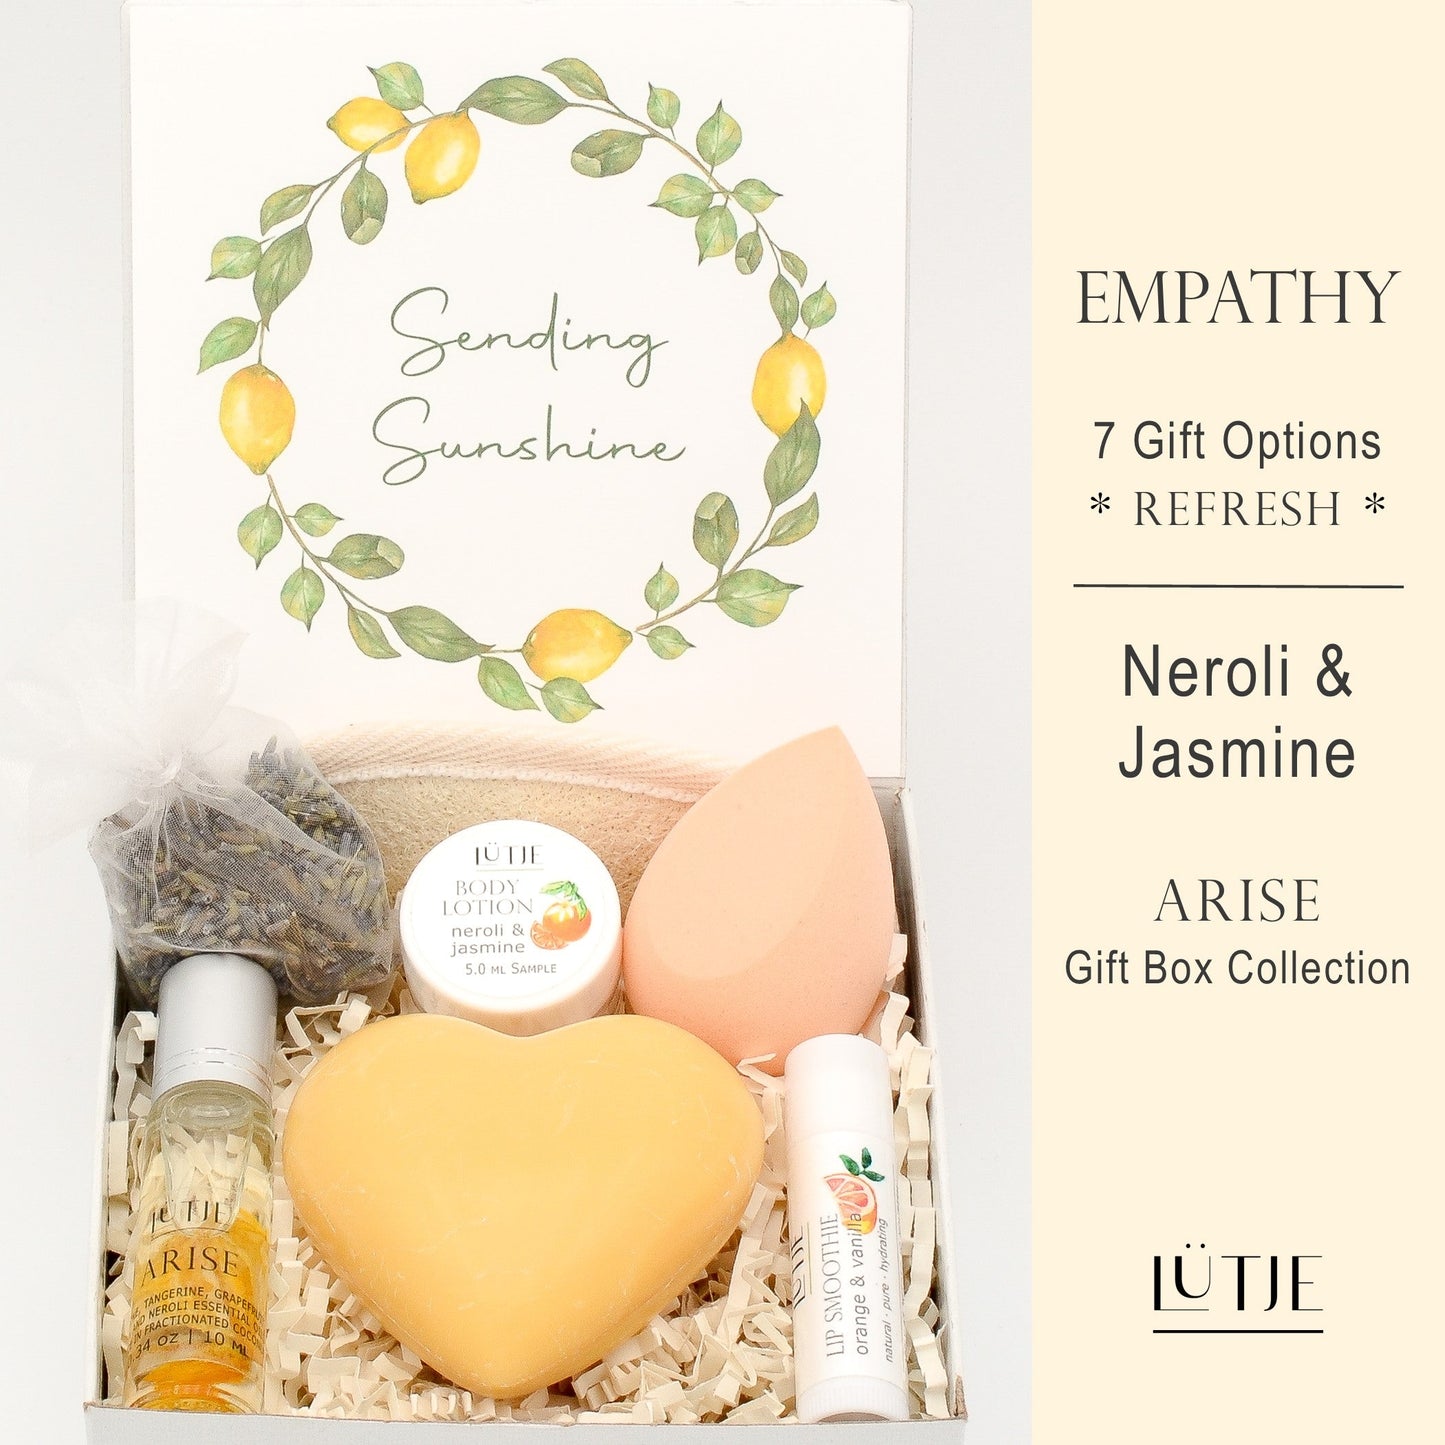 Gift Box for women, wife, daughter, BFF, sister, mom, or grandma, includes Neroli & Jasmine hand lotion spray and body lotion, essential oil, lip balm, soothing muscle balm, Bergamot & Pear room & linen spray, French soap, French bath salts, hydrating face mask, other bath, spa and self-care items, and 18K gold-plated necklace with engraved heart.